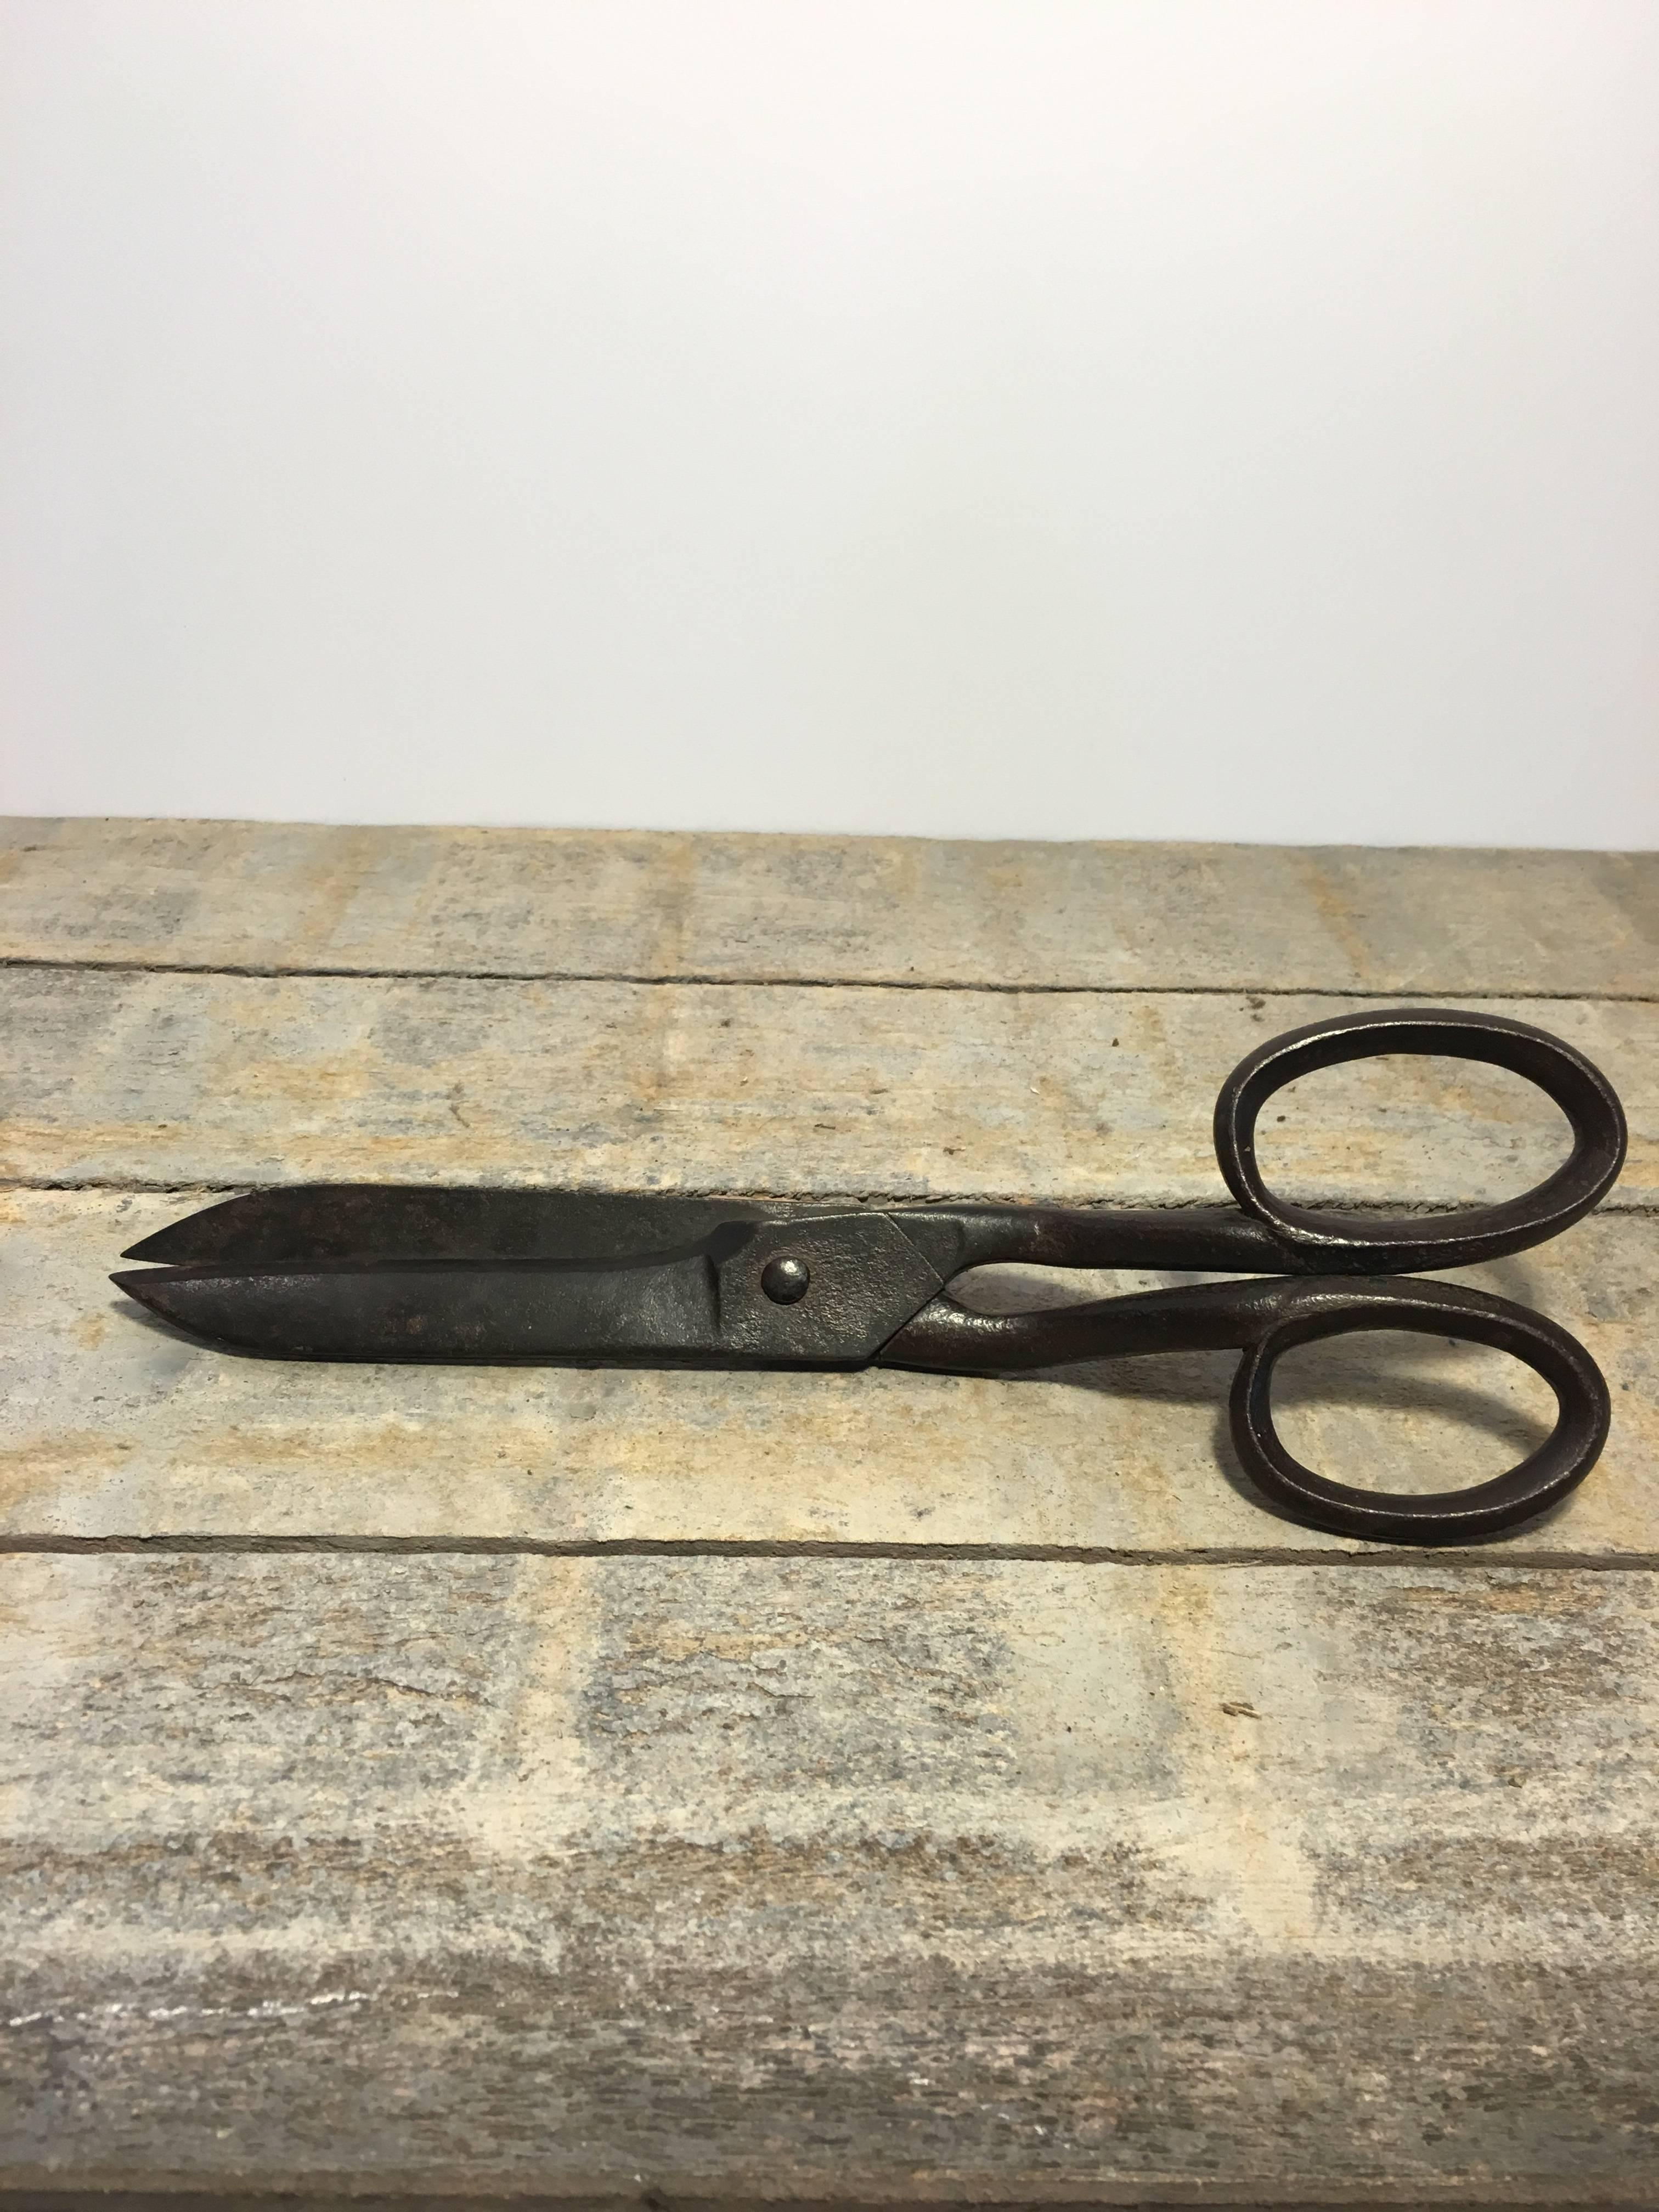 Large vintage industrial scissors with a gently curved handle. In working condition and great for ornamental or office use.